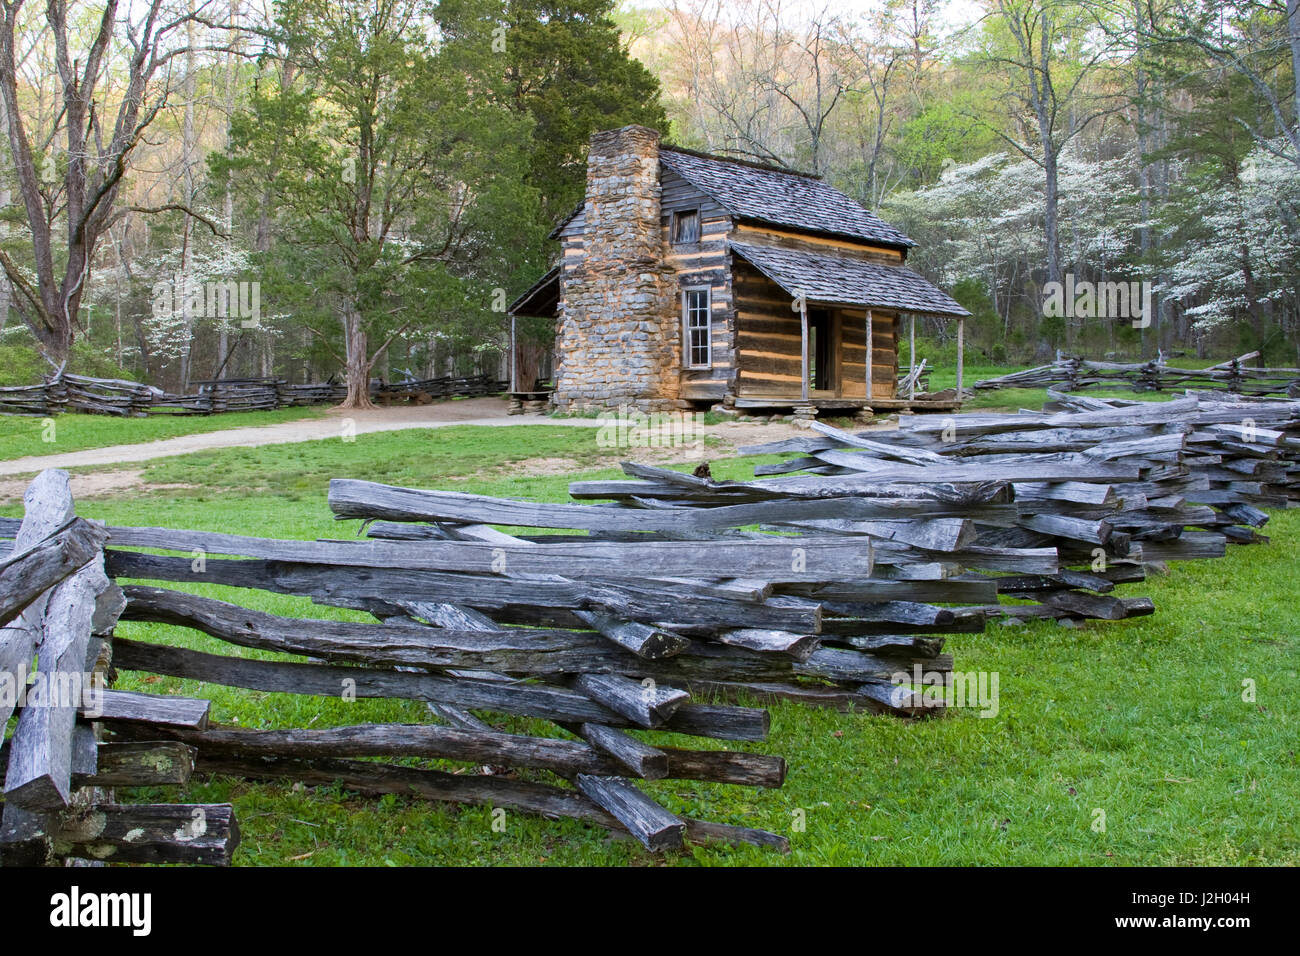 John Oliver Cabin in spring, Cades Cove area, Great Smoky Mountains National Park, Tennessee Stock Photo